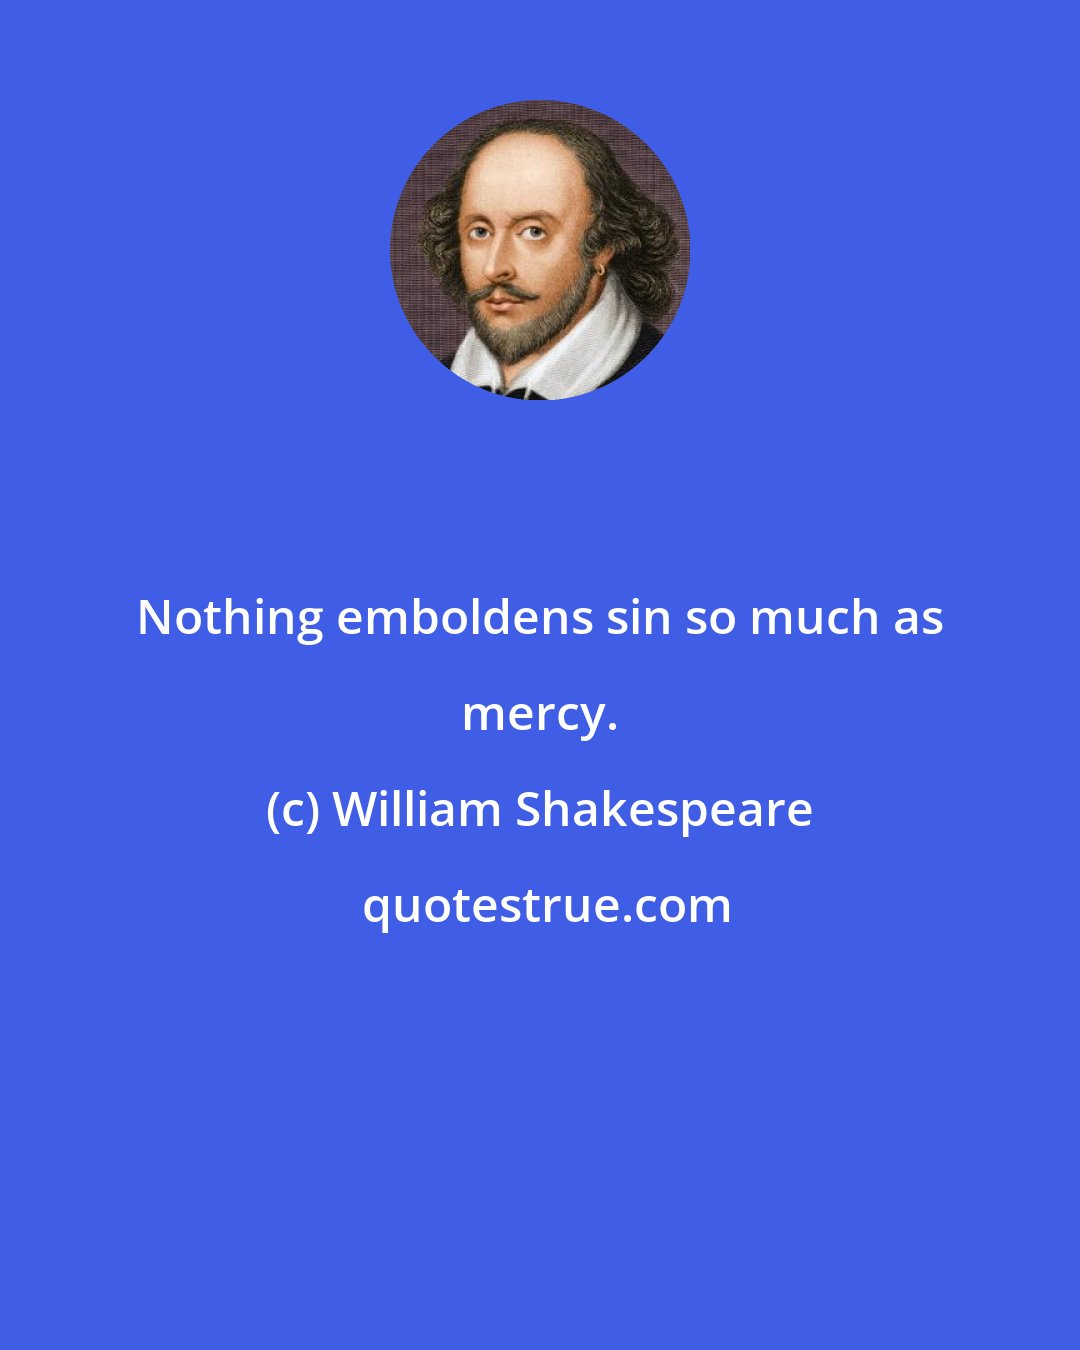 William Shakespeare: Nothing emboldens sin so much as mercy.